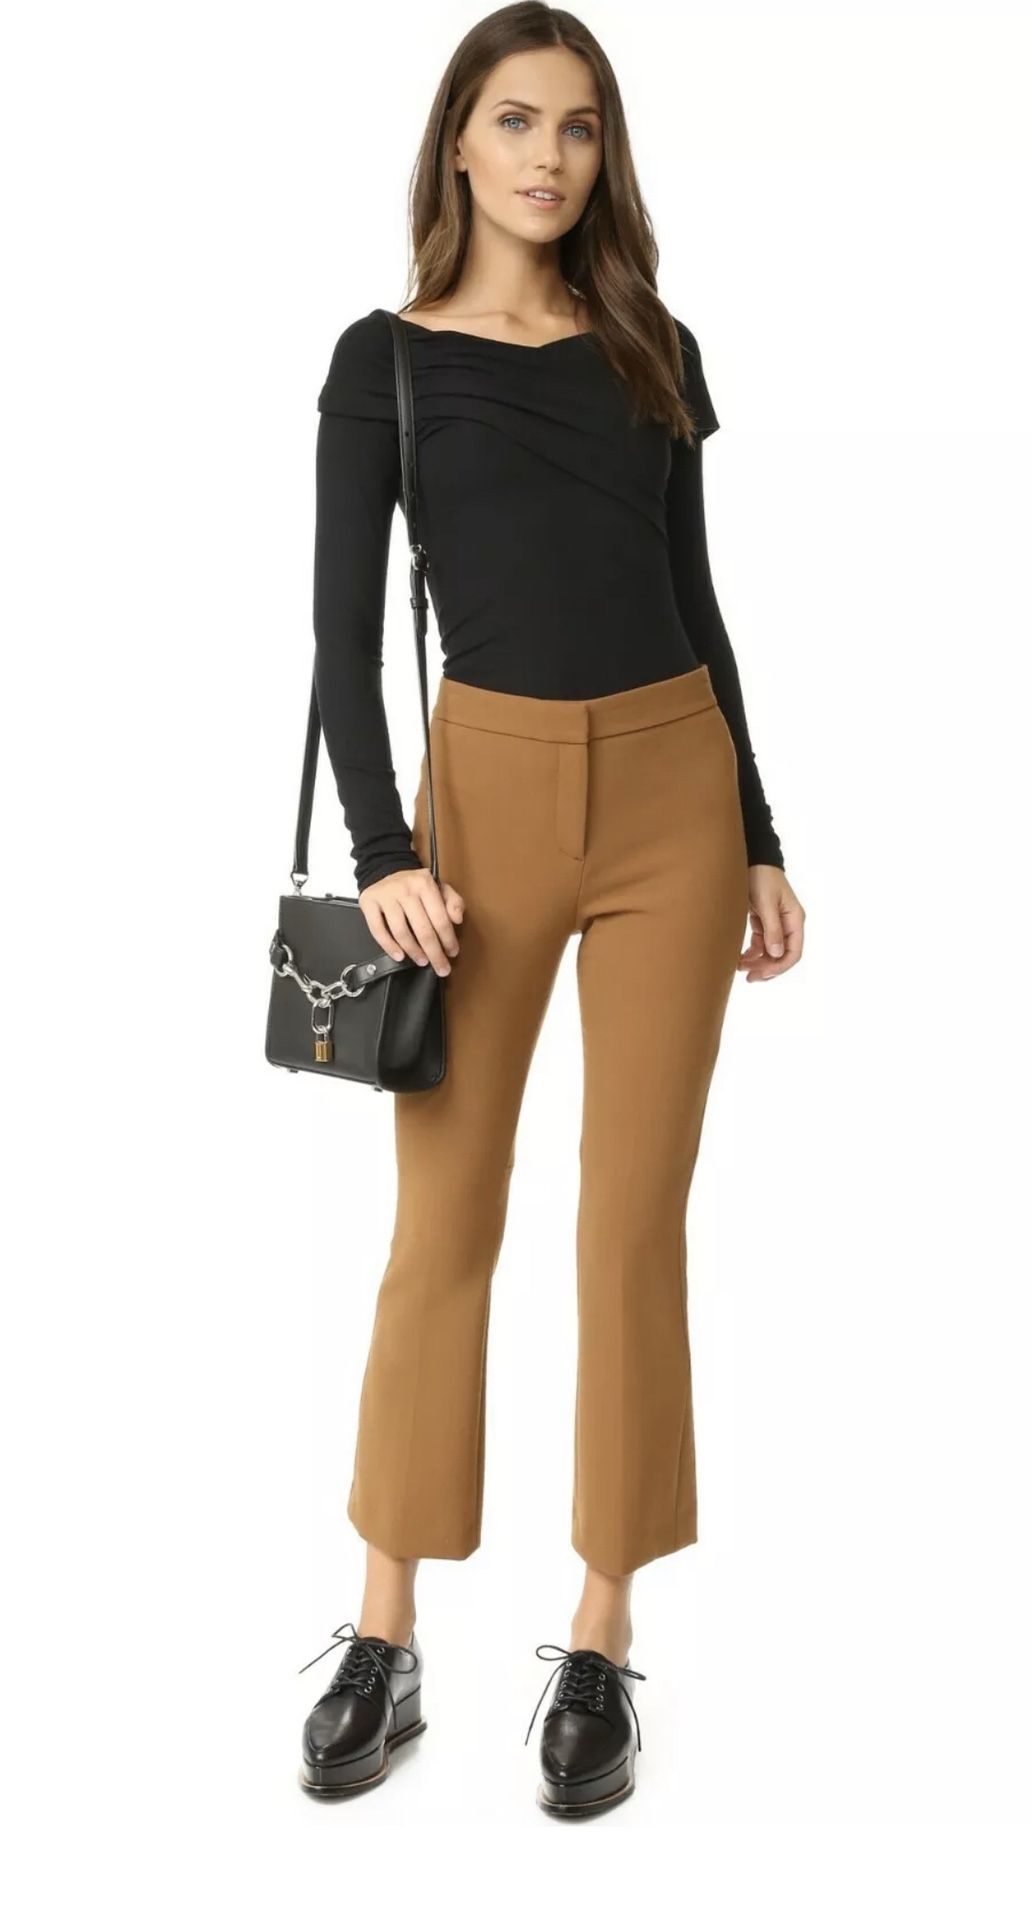 Brand New NWT $314 THEORY 4 Wool Cropped Work Dress Pants Trousers Women's Ladies Clothing